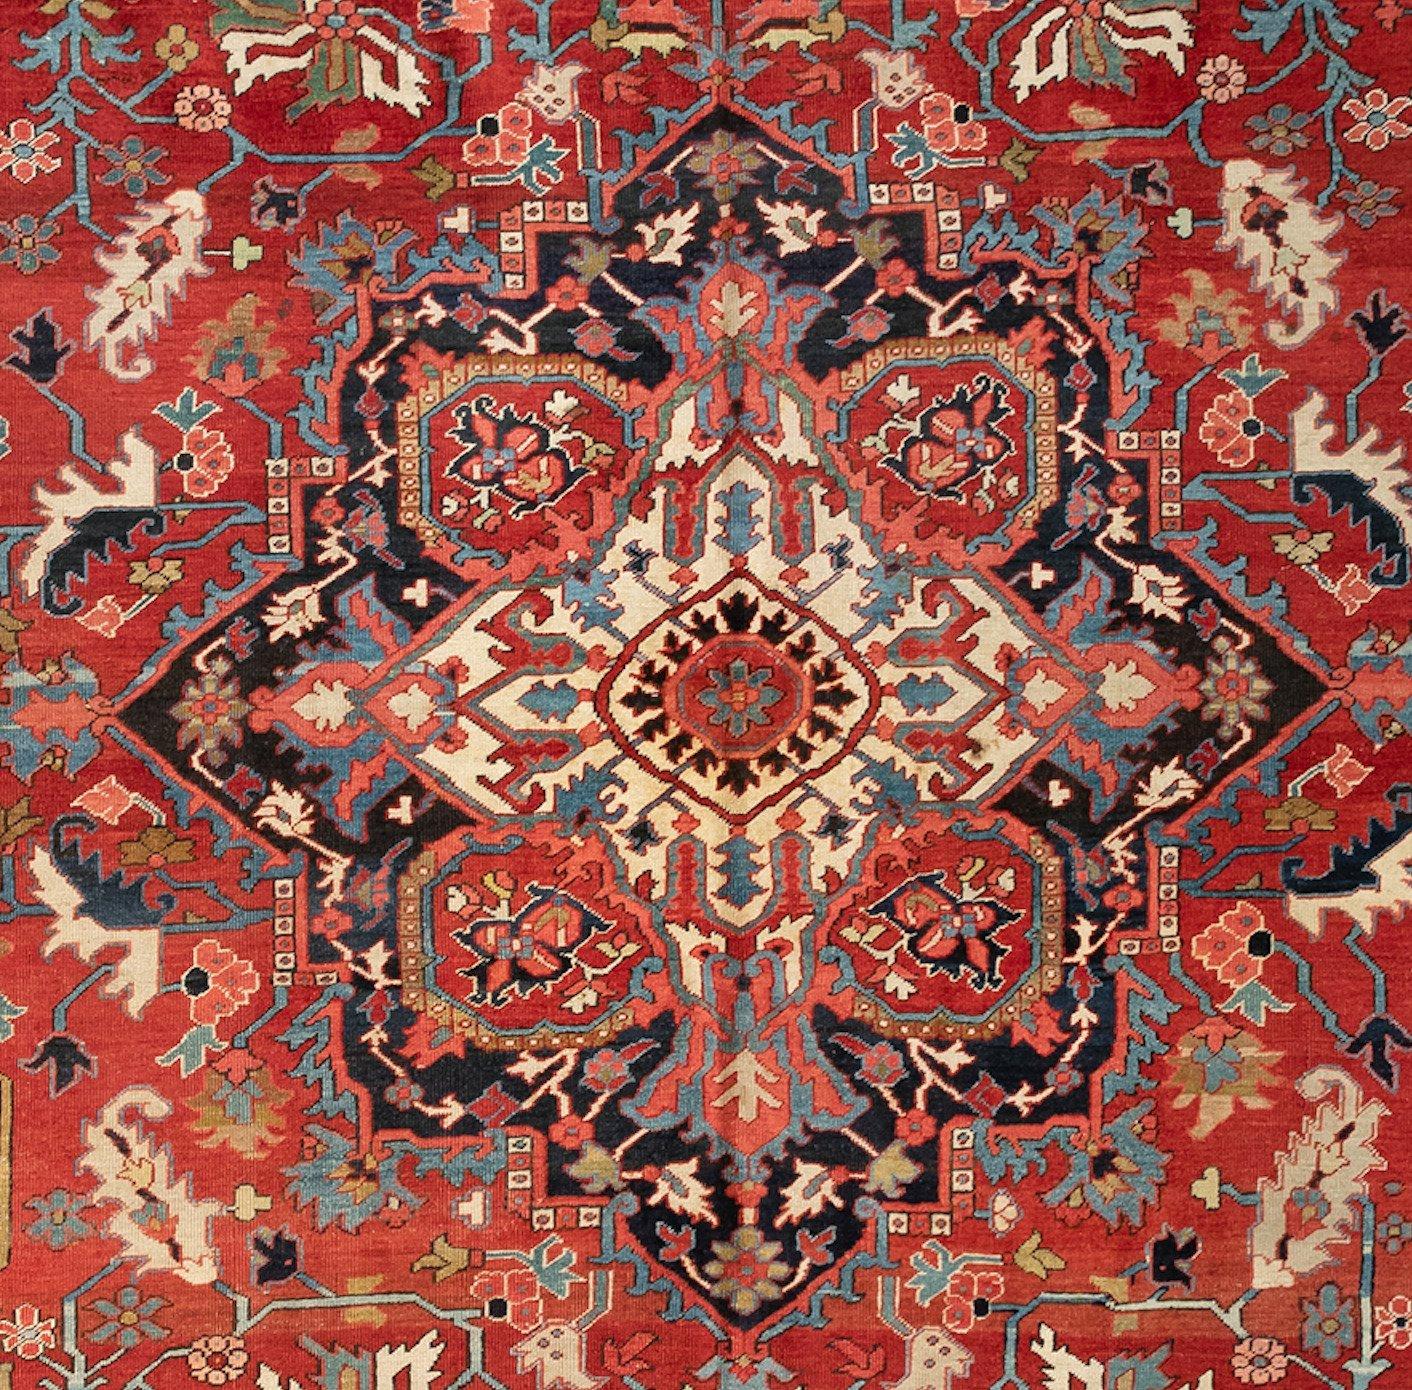 This is a lovely hand knotted antique Serapi carpet with a medallion from the 1900-1910s. This square rug measures 9.10 x 11.11 ft.